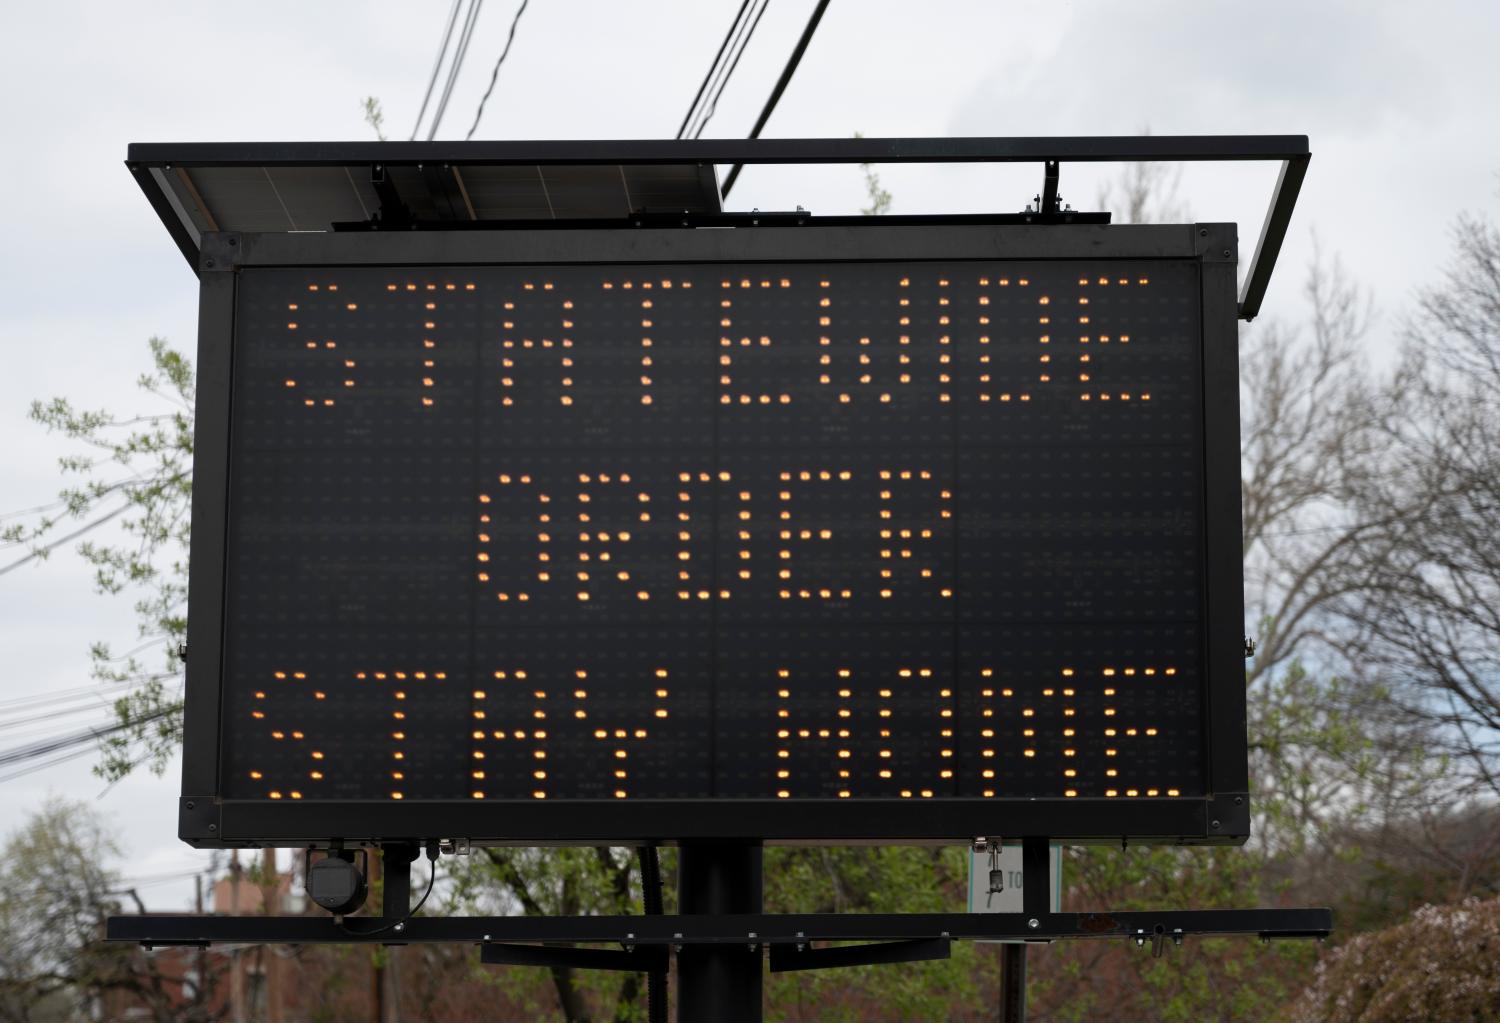 Electronic traffic sign that reads "Statewide Order Stay Home"